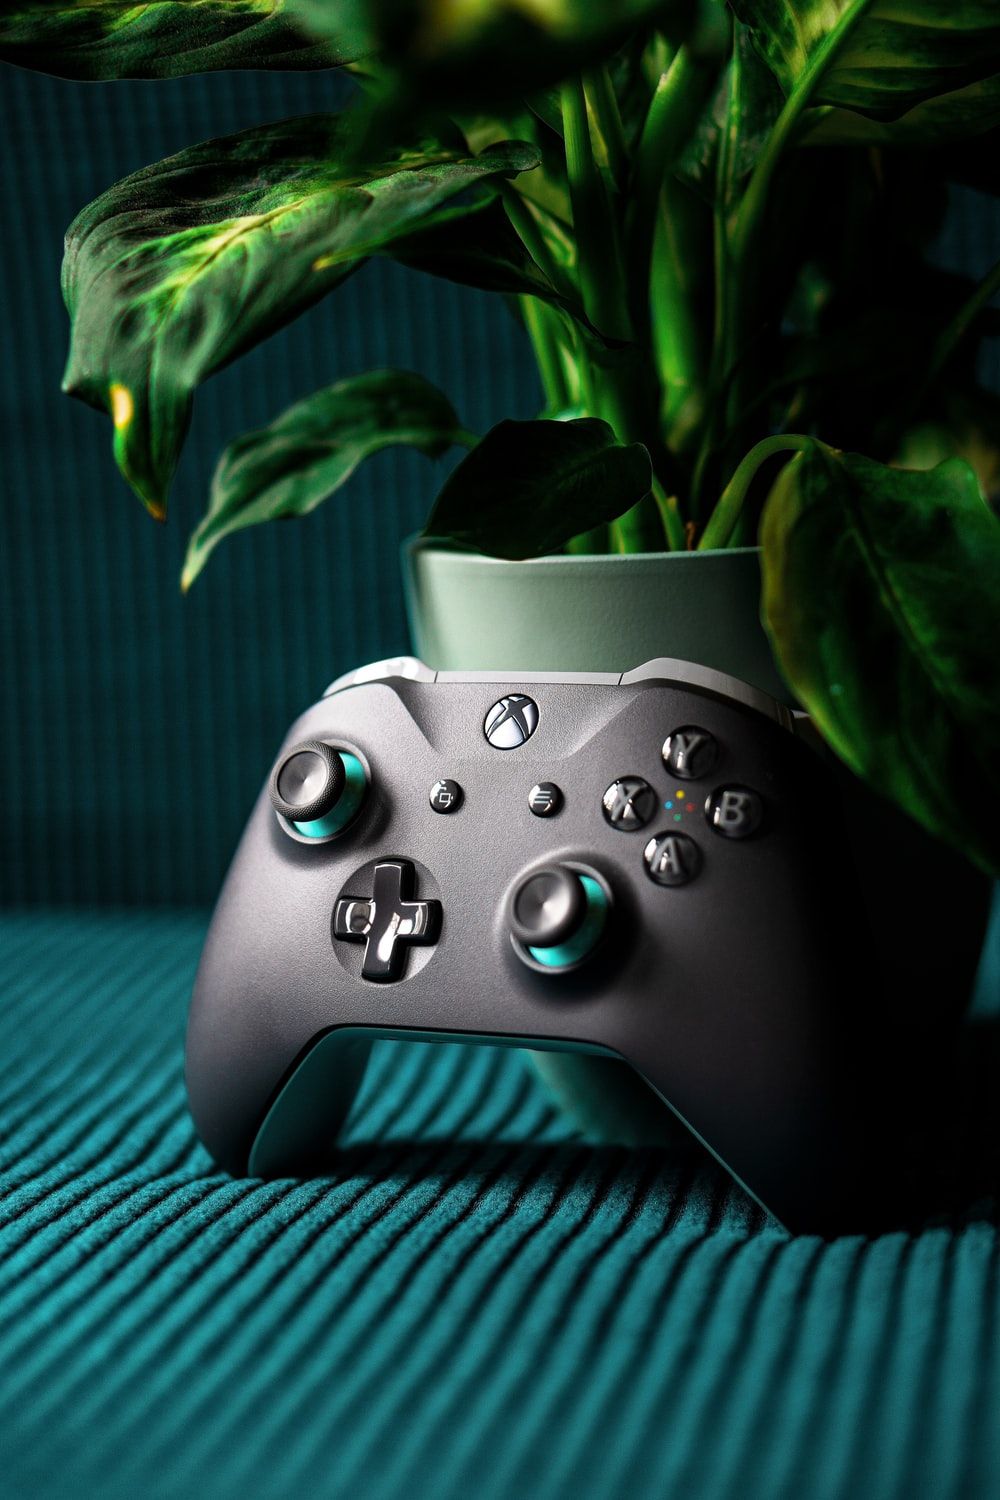 Gaming Controller Picture. Download Free Image